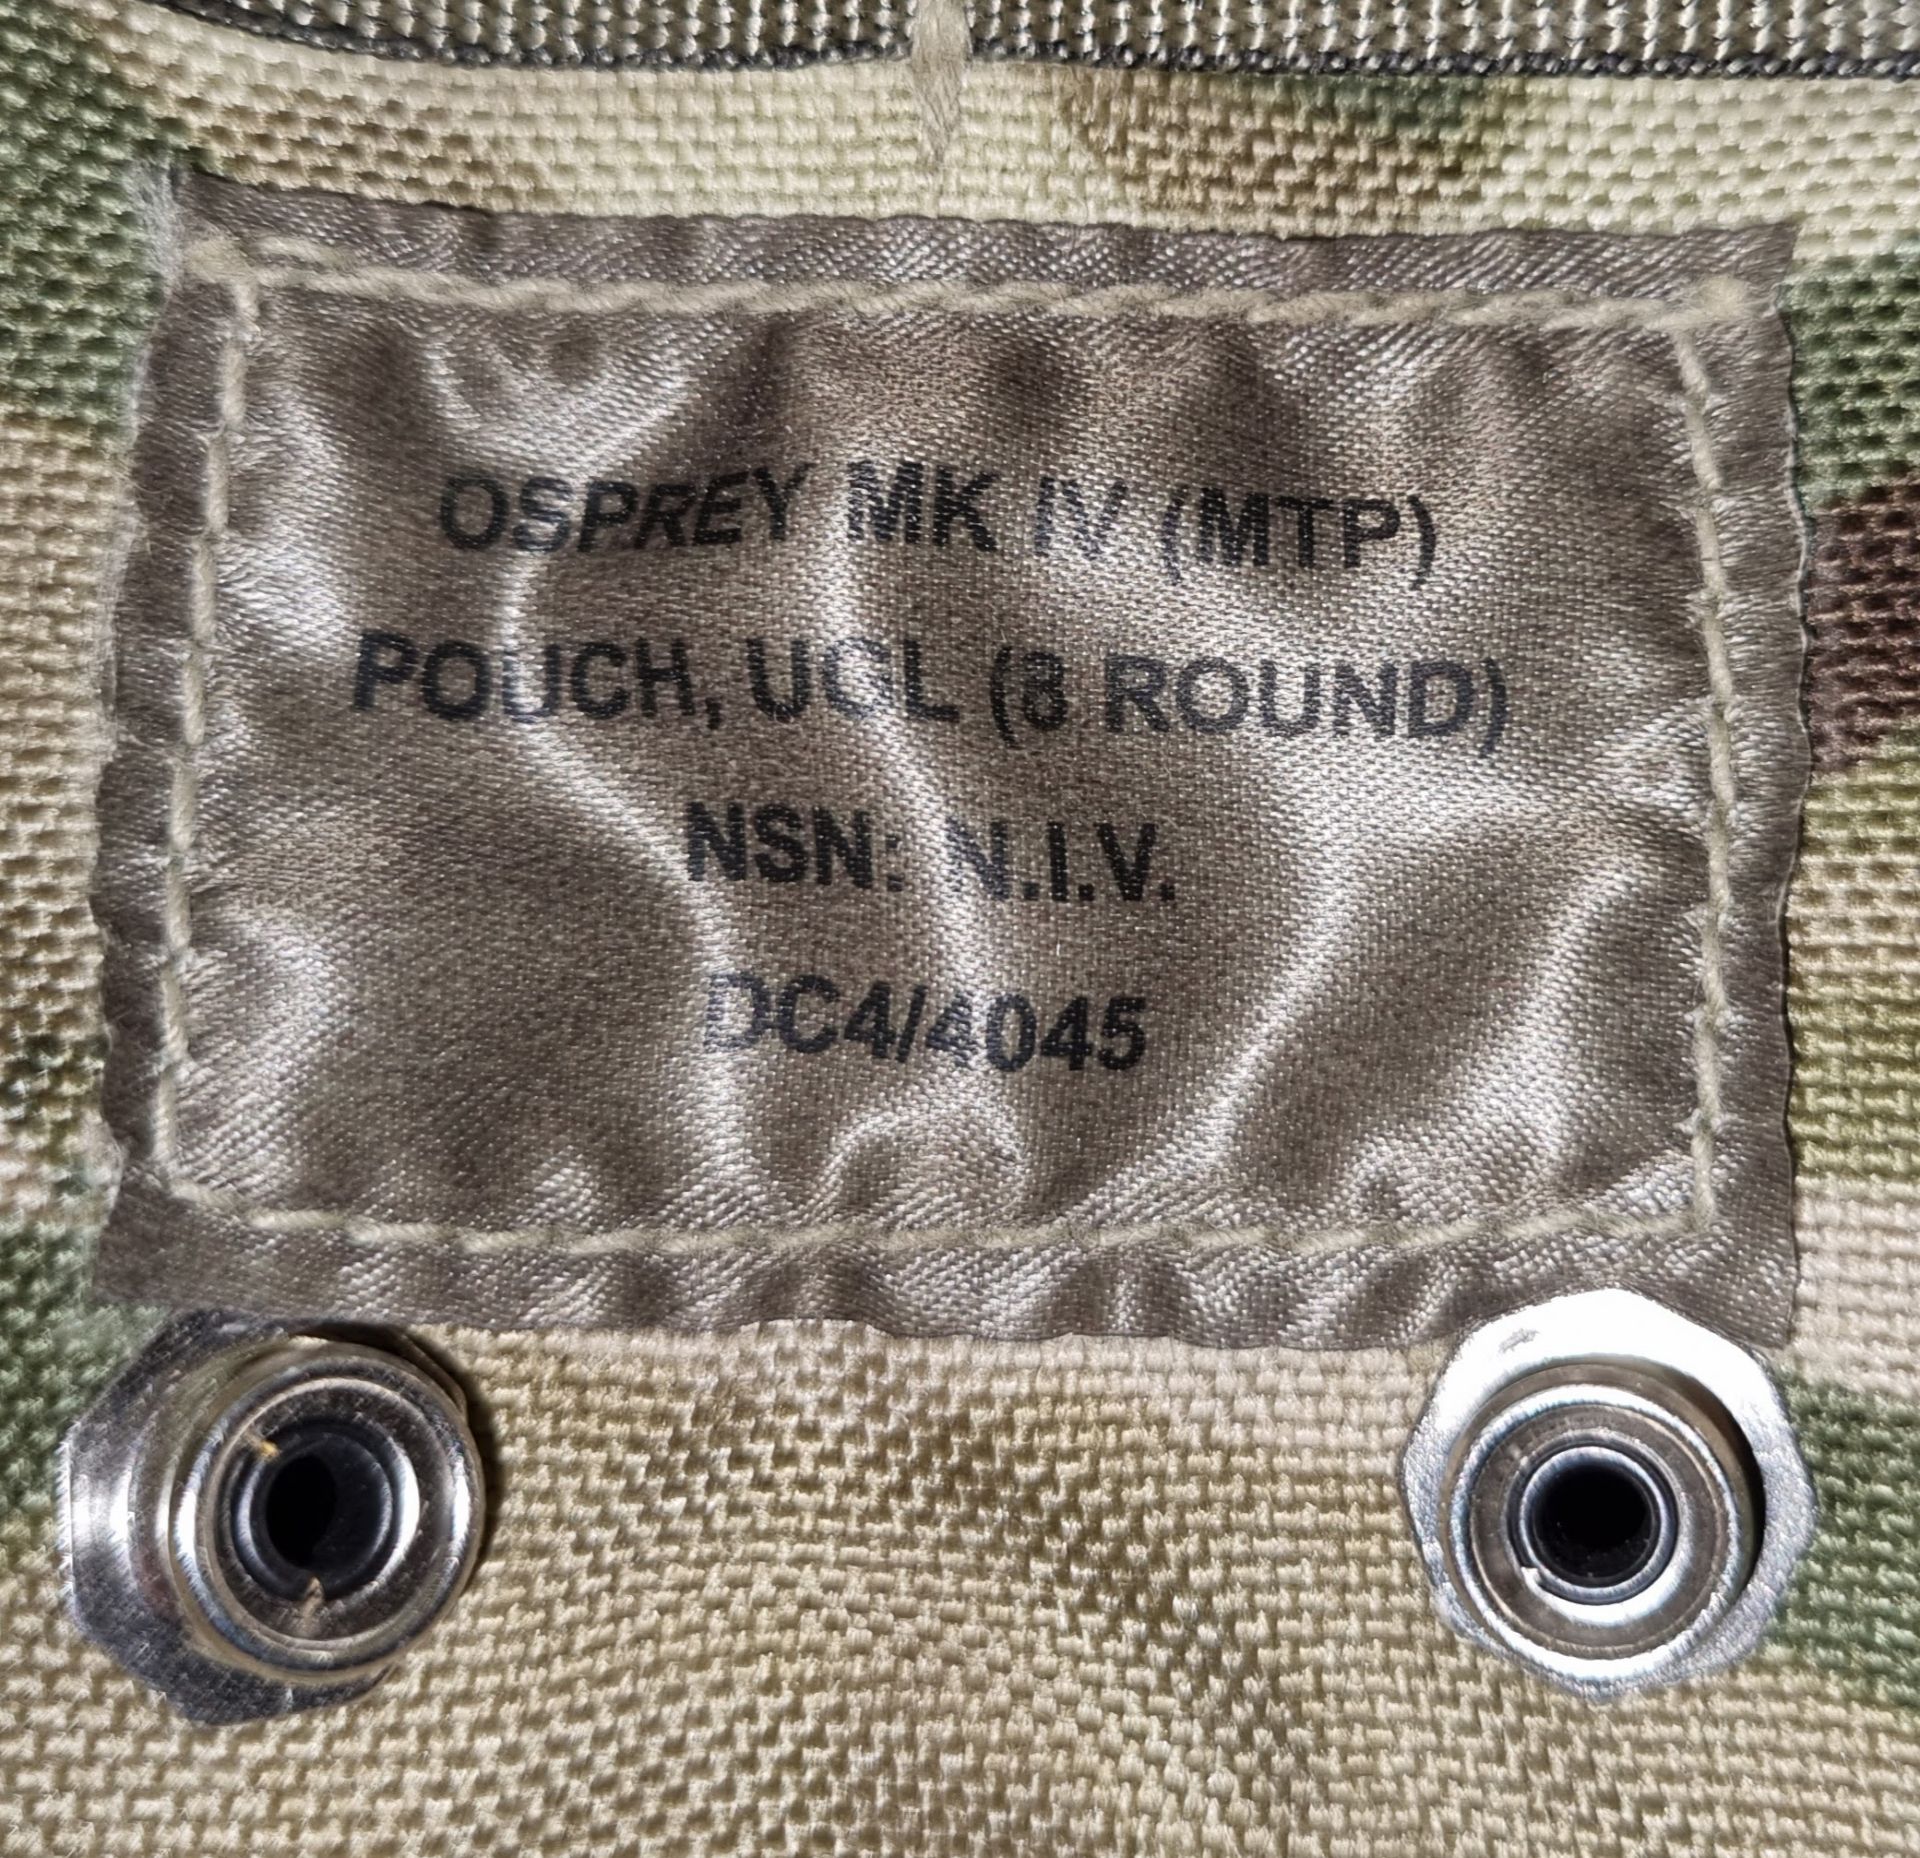 56x British Army MTP pouches - mixed types - mixed sizes - mixed grades - Image 8 of 12